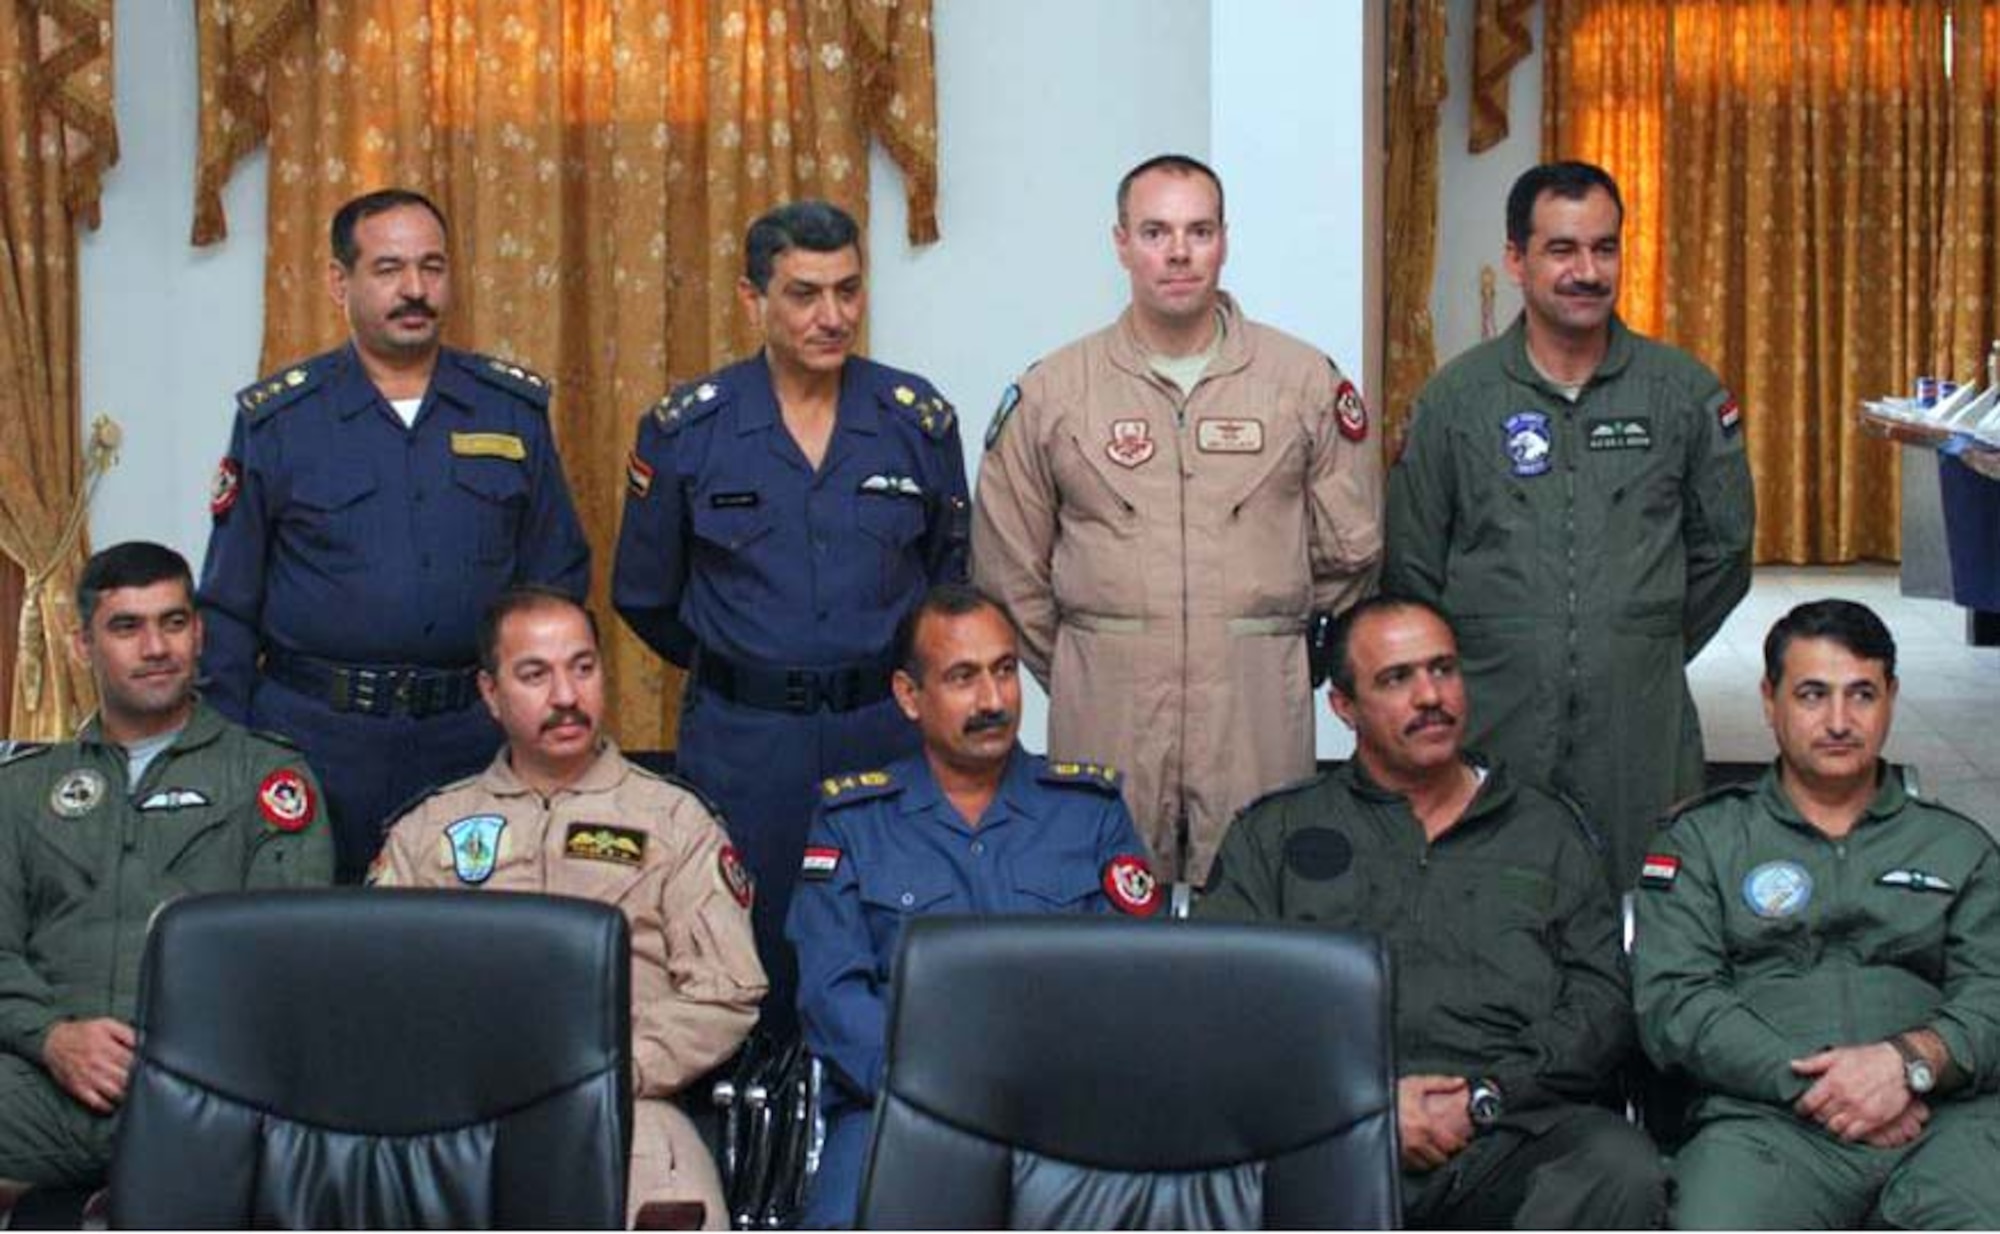 Iraqi safety officer's pose with Lt. Col. Andrew Sellberg, Safety Advisor and Instructor, during the advanced flight safety officers graduation Jan. 24, 2010. Stting in front row, from right to left, Col Khalid, Lt .Col. Muhammed, Lt. Col. Khalid, Maj Taleb, Maj Hussam. Back row, from right to left, Lt. Col. Ala'din, Lt. Col. Sellbeg,  Brig. Gen. Salh and Col Muhammed.